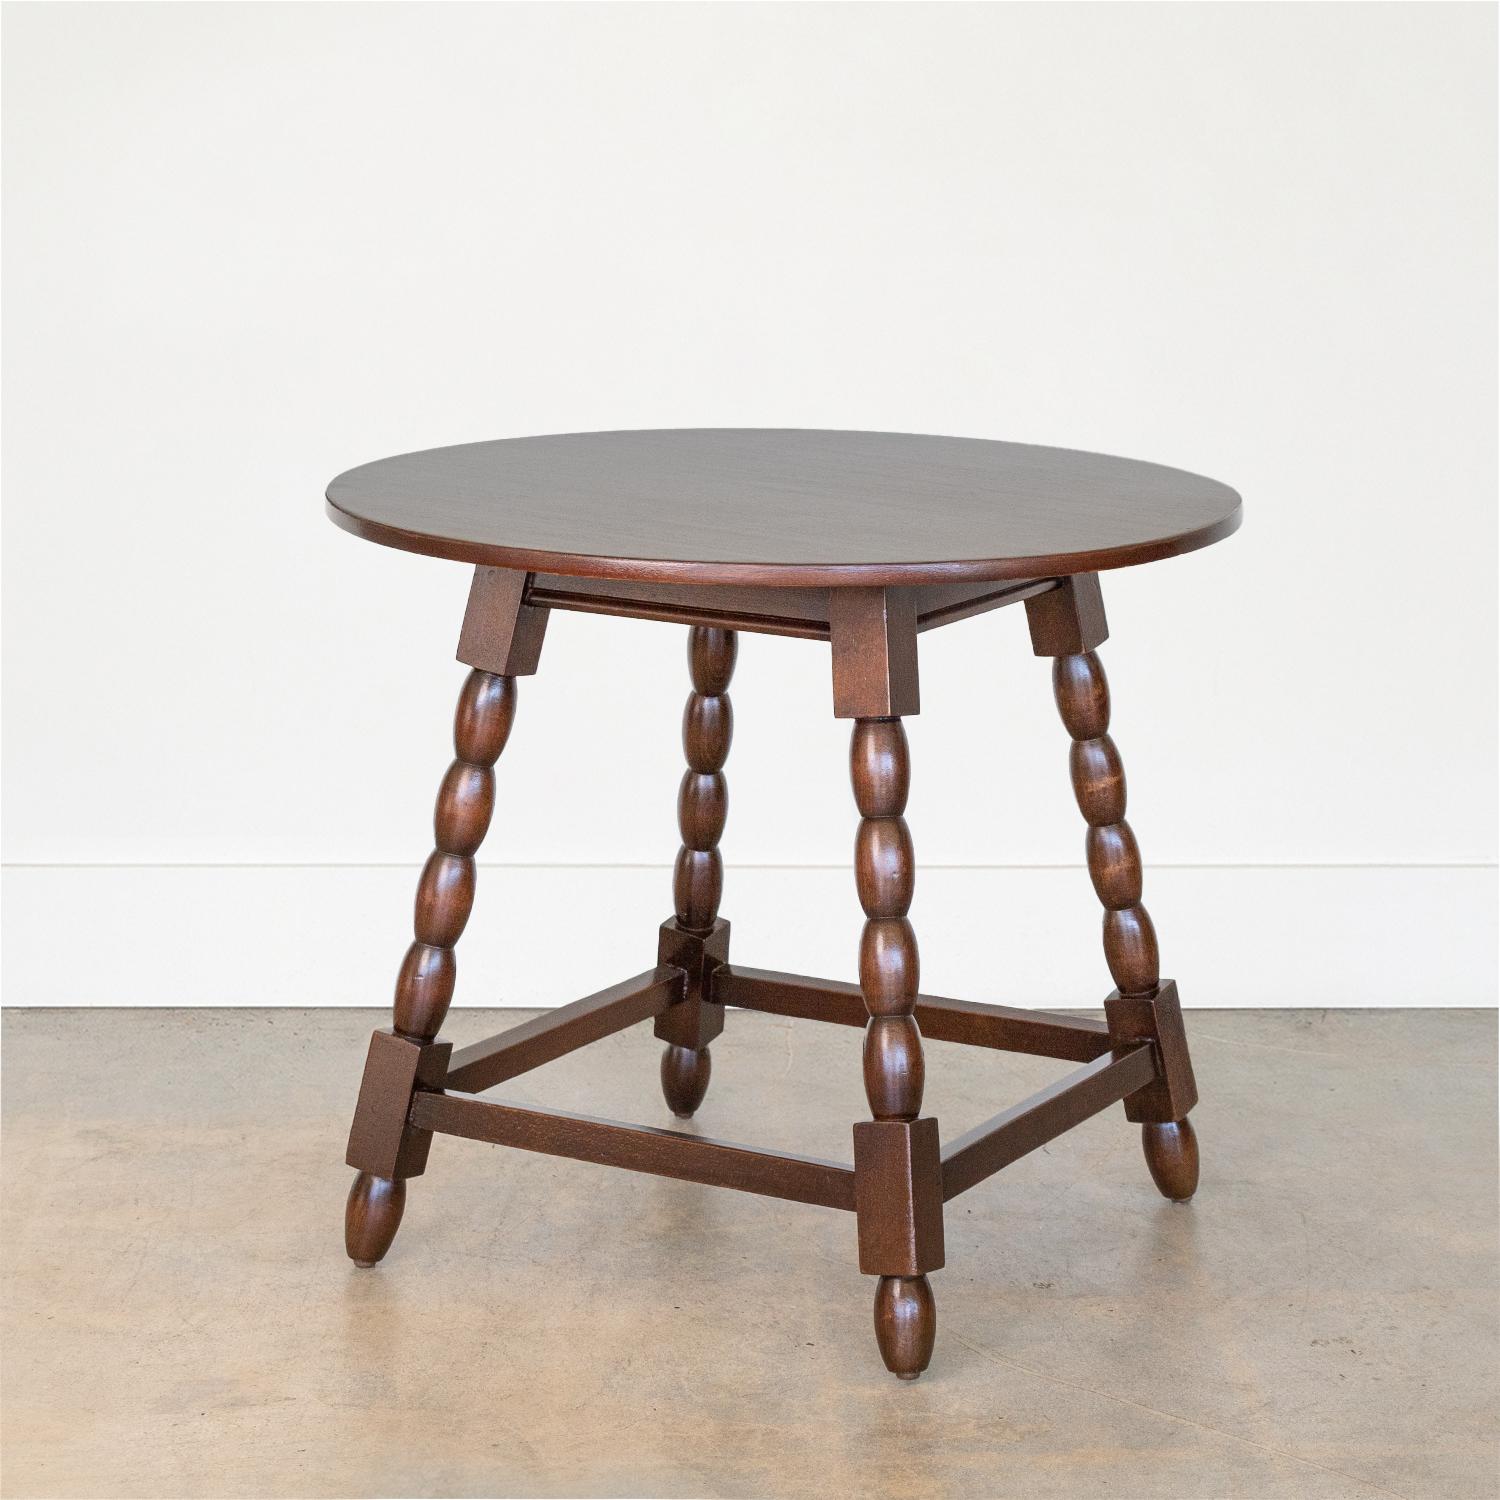 Large 1940s French wood circular table with four angled bobbin legs and large circular top. Newly refinished in a dark stain.